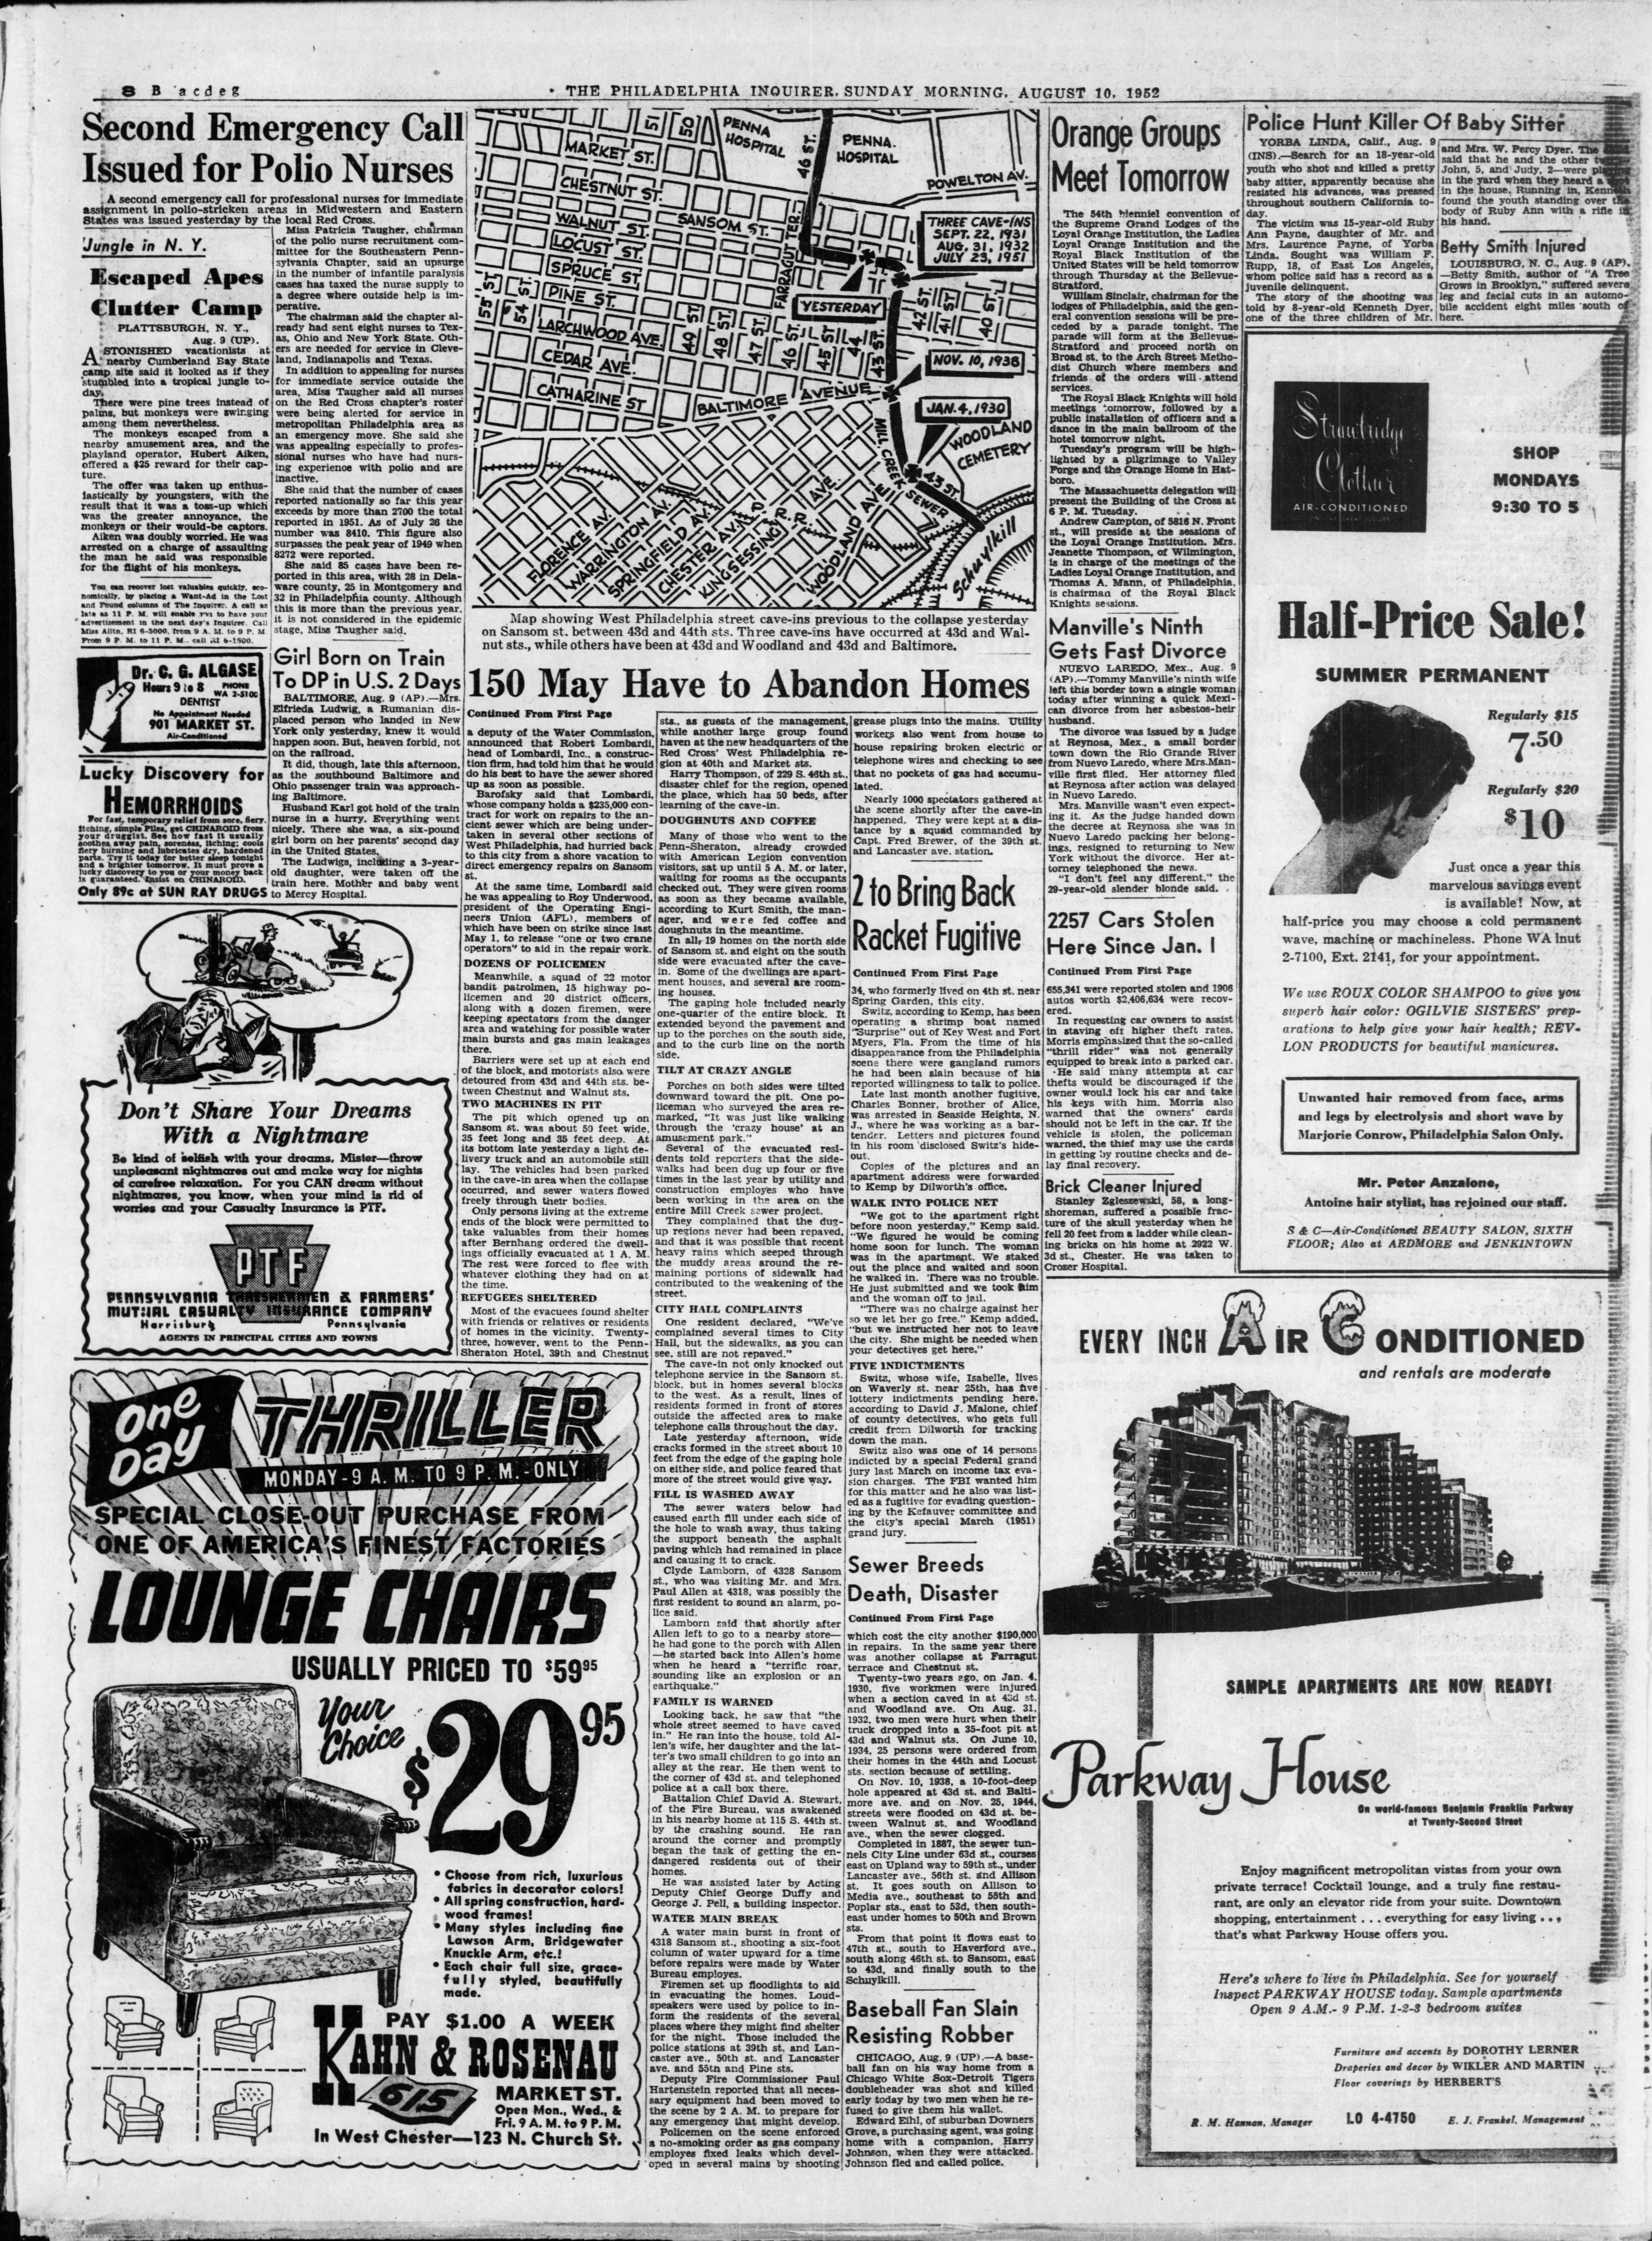 150 May Have to Abandon Homes, Inquirer, Aug. 10, 1952